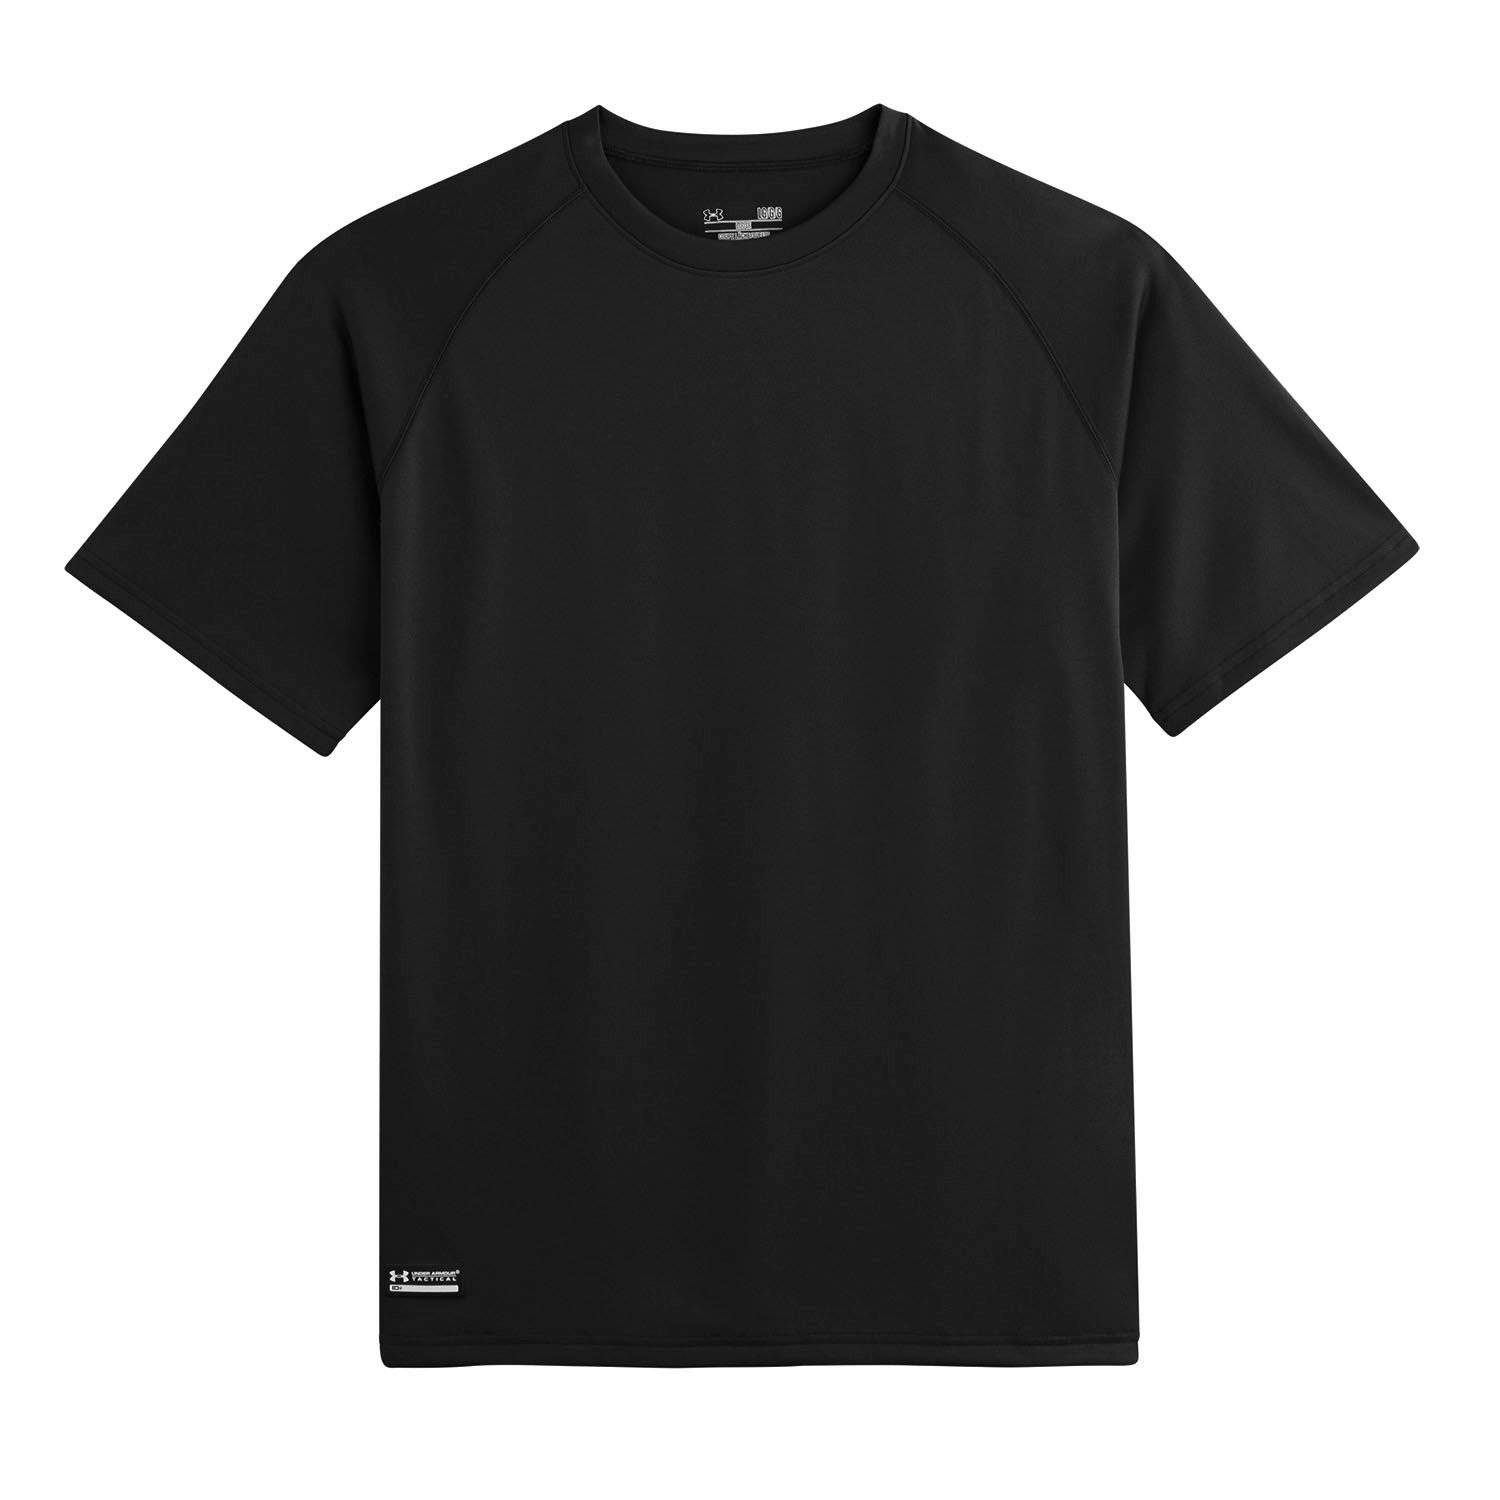  Under Armour Men's Tactical HeatGear Compression V-Neck T-Shirt  SM Black : Clothing, Shoes & Jewelry